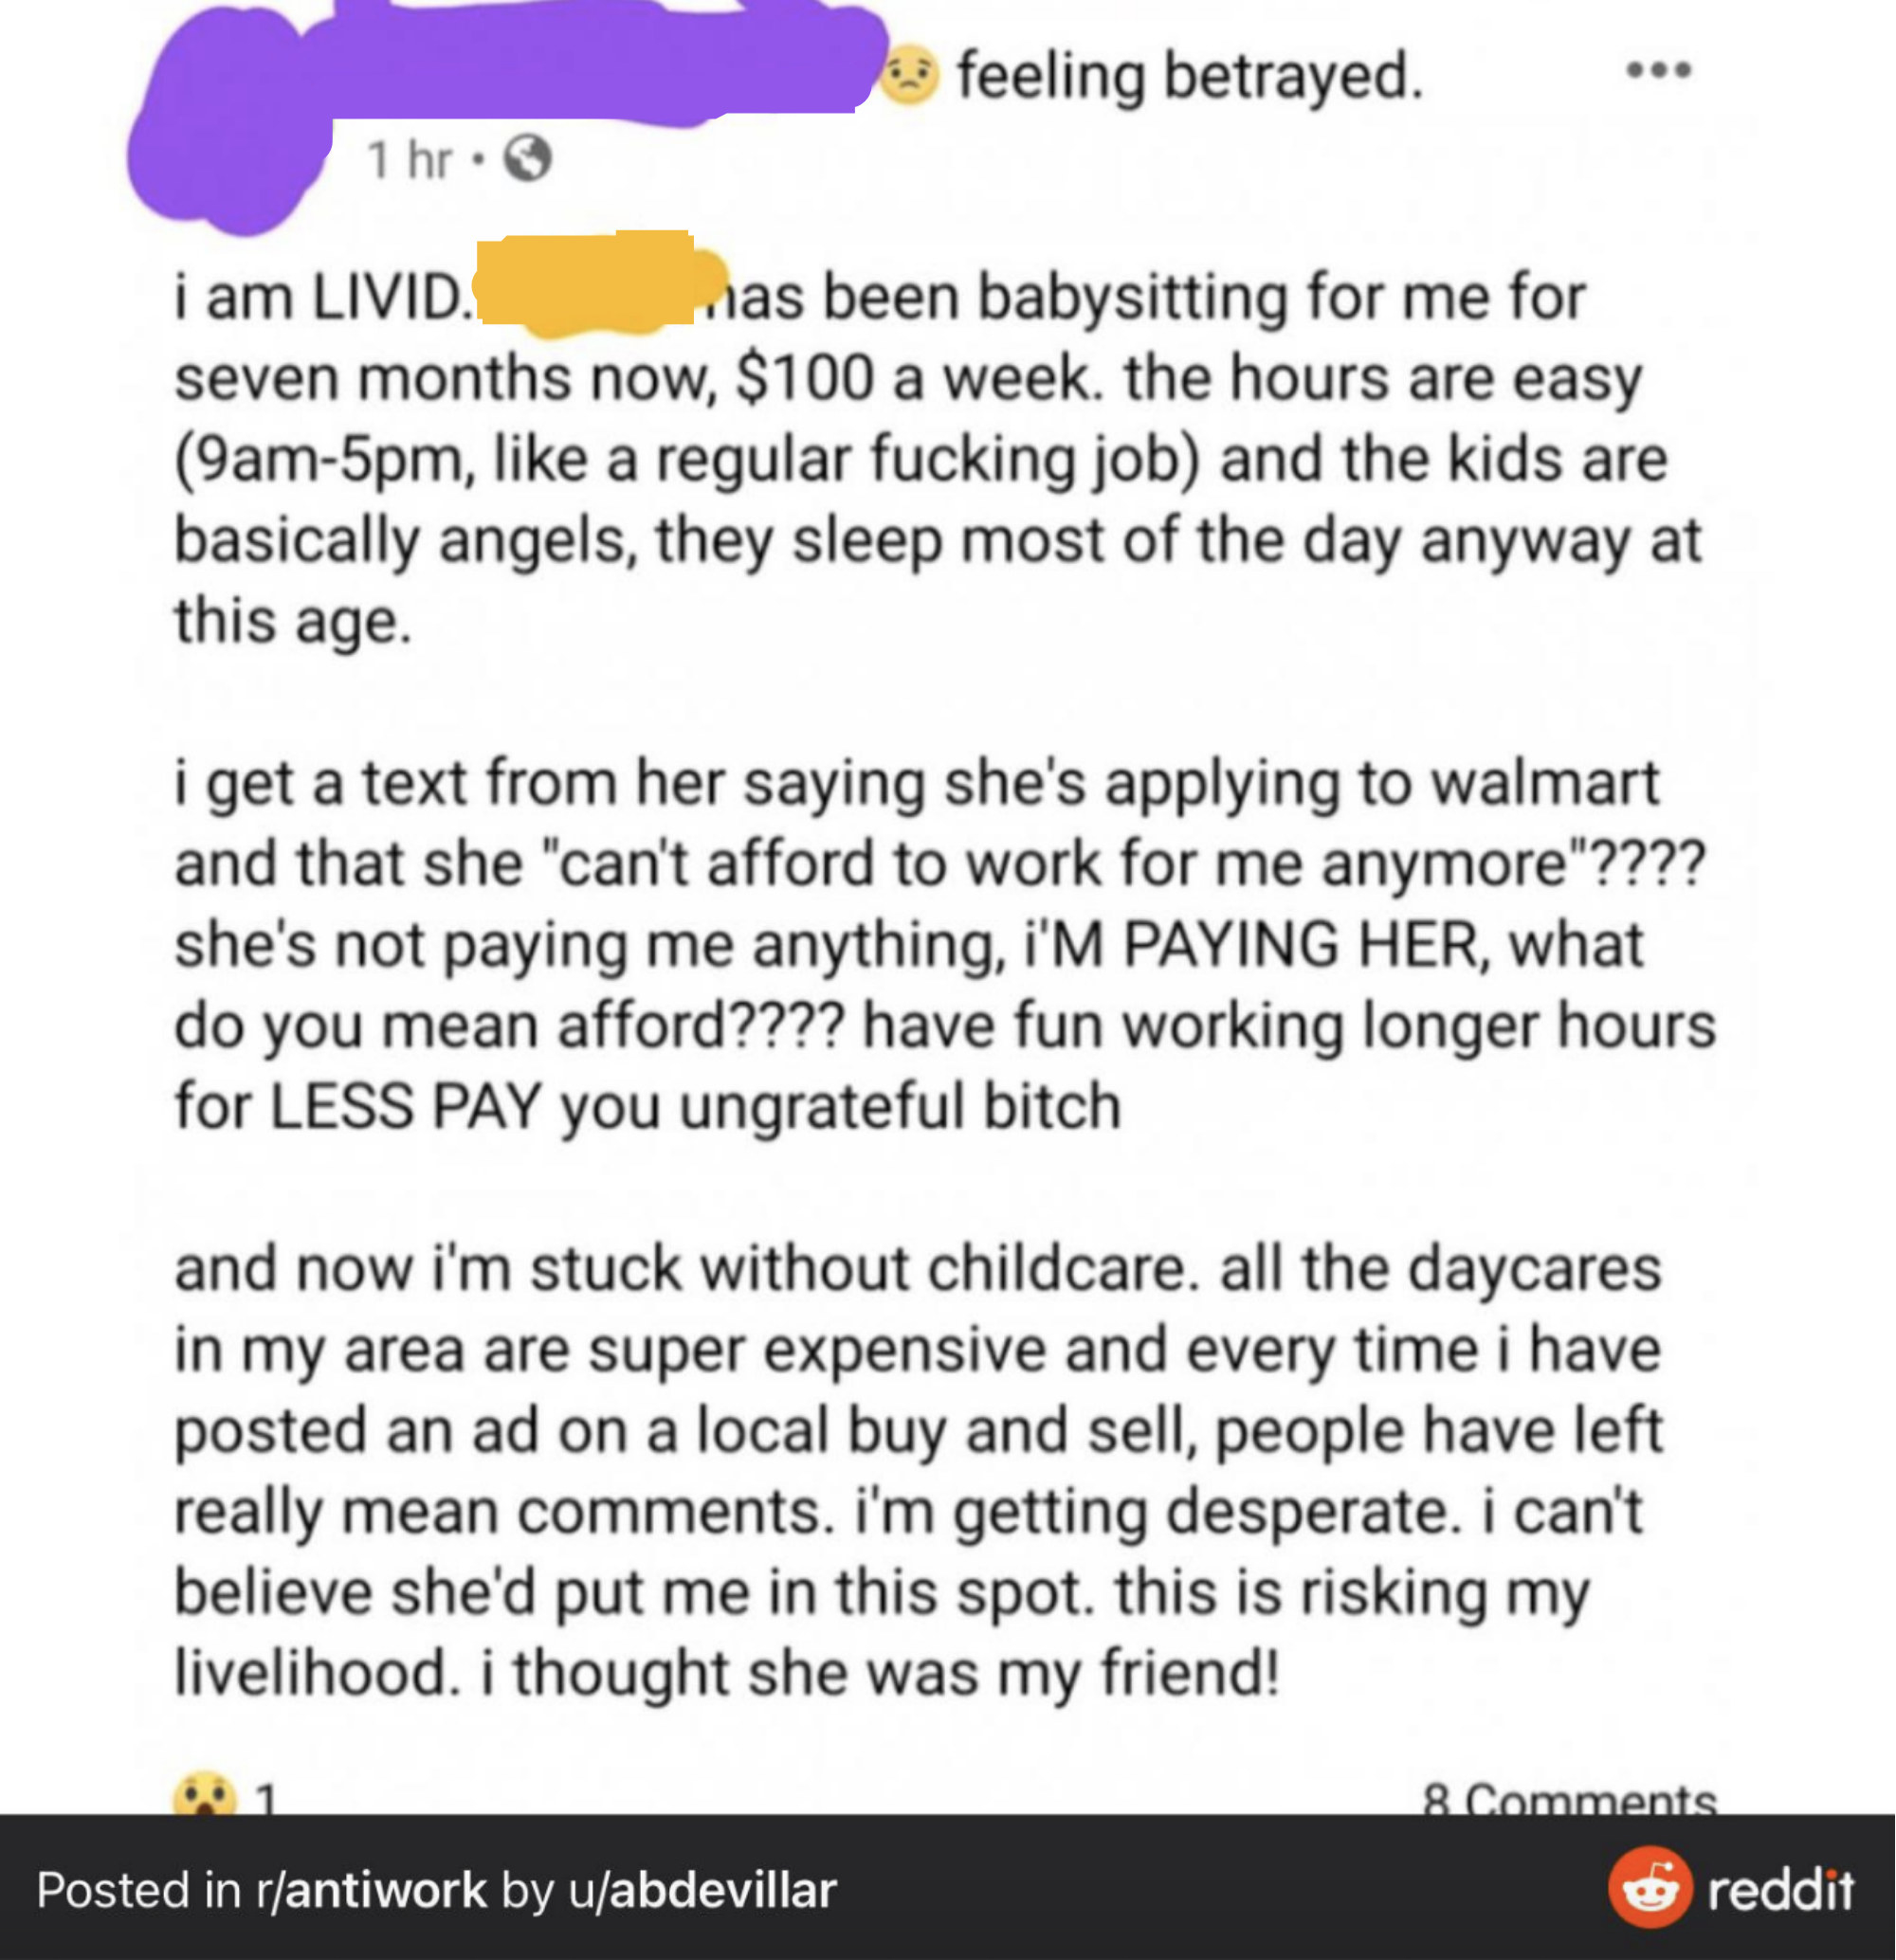 person saying that she paid her babysitter $100 a week for working 8 hours a day so why is her babysitter so ungrateful to take another job